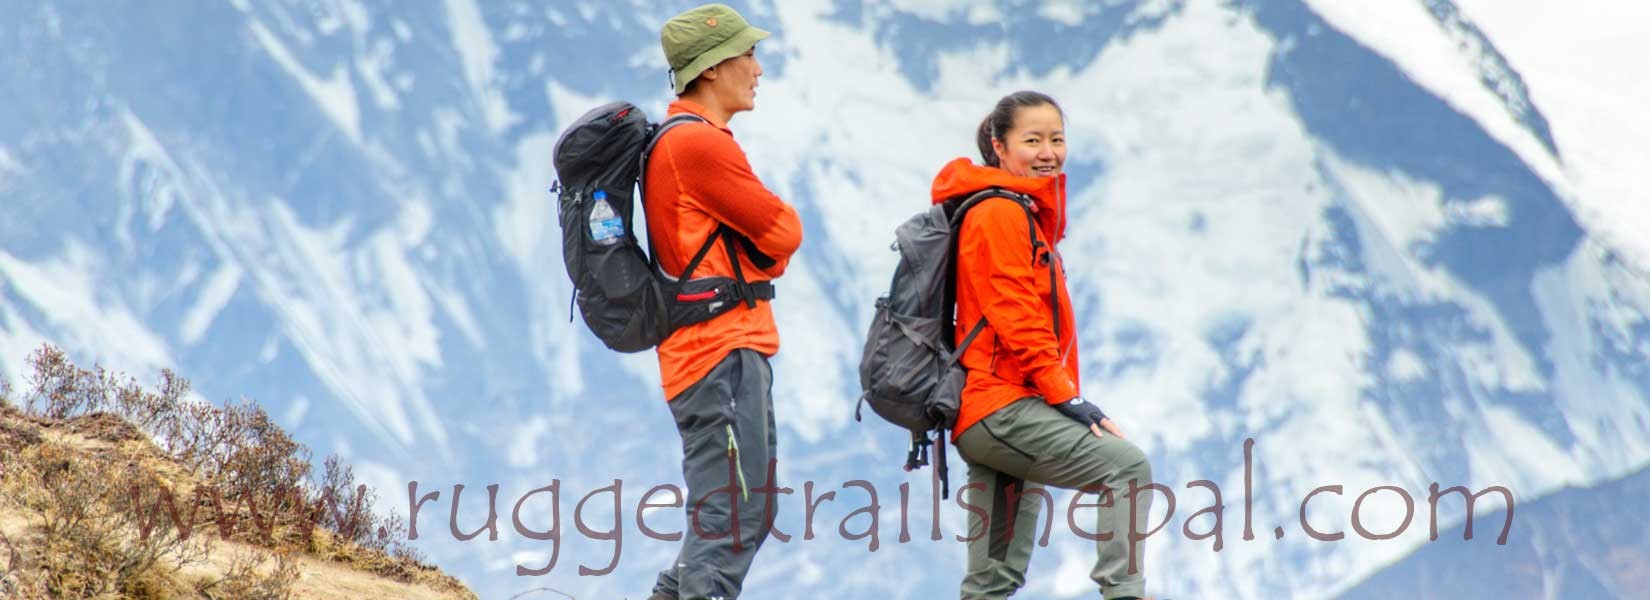 6 days journey to see mount everest from kathmandu rugged trails